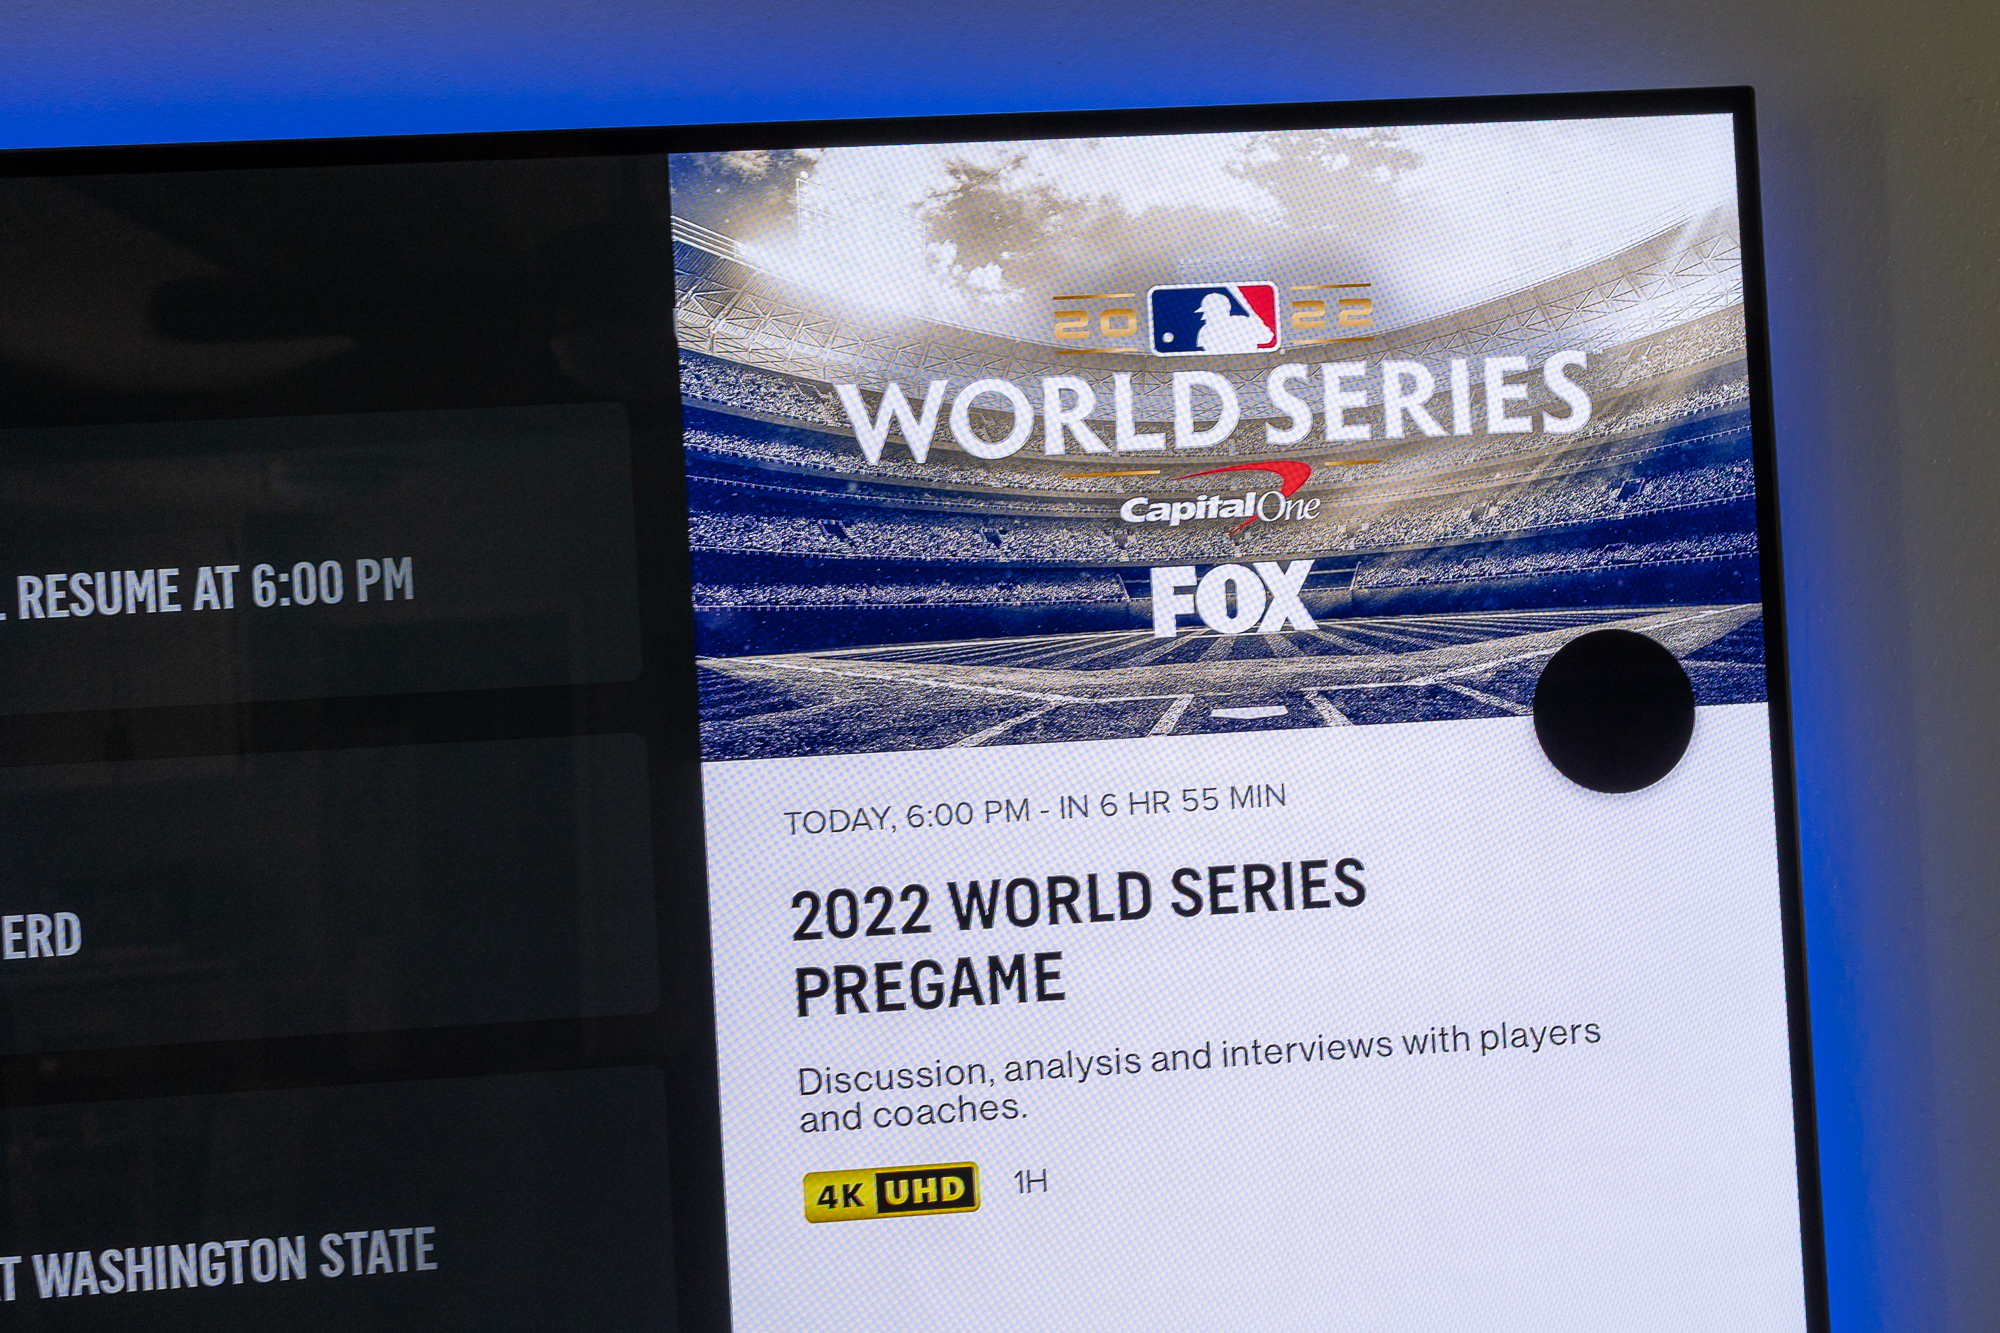 World Series in the Fox Sports app.